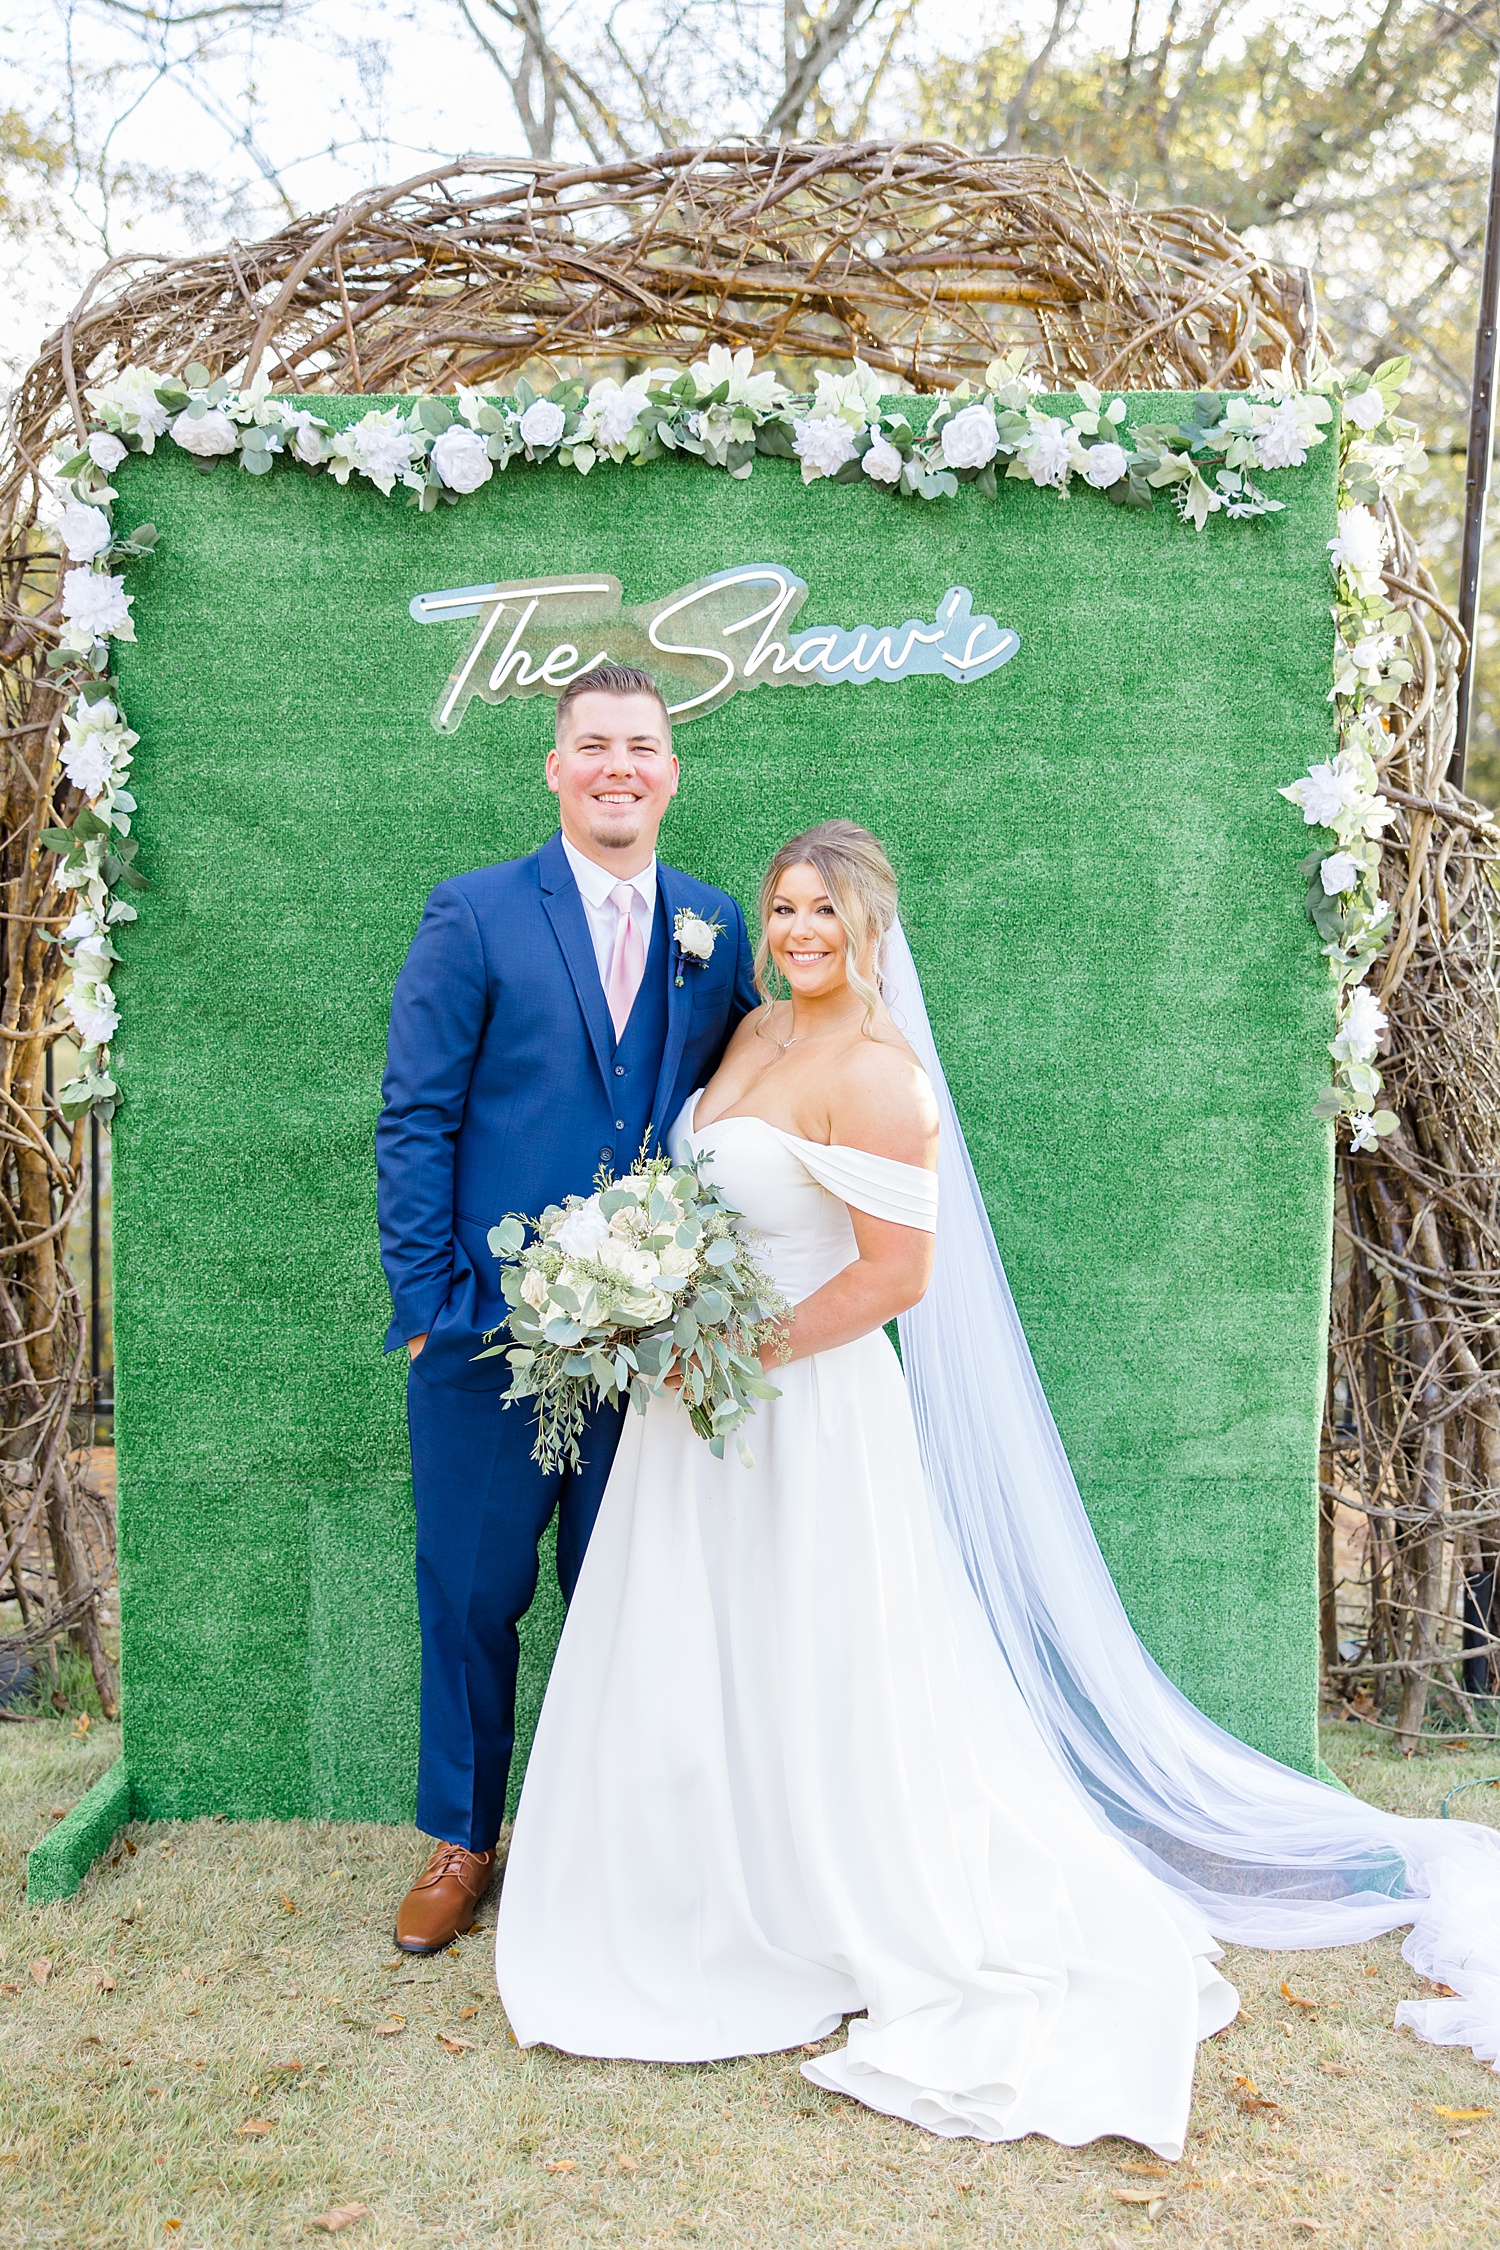 newlyweds in front of wedding sign 